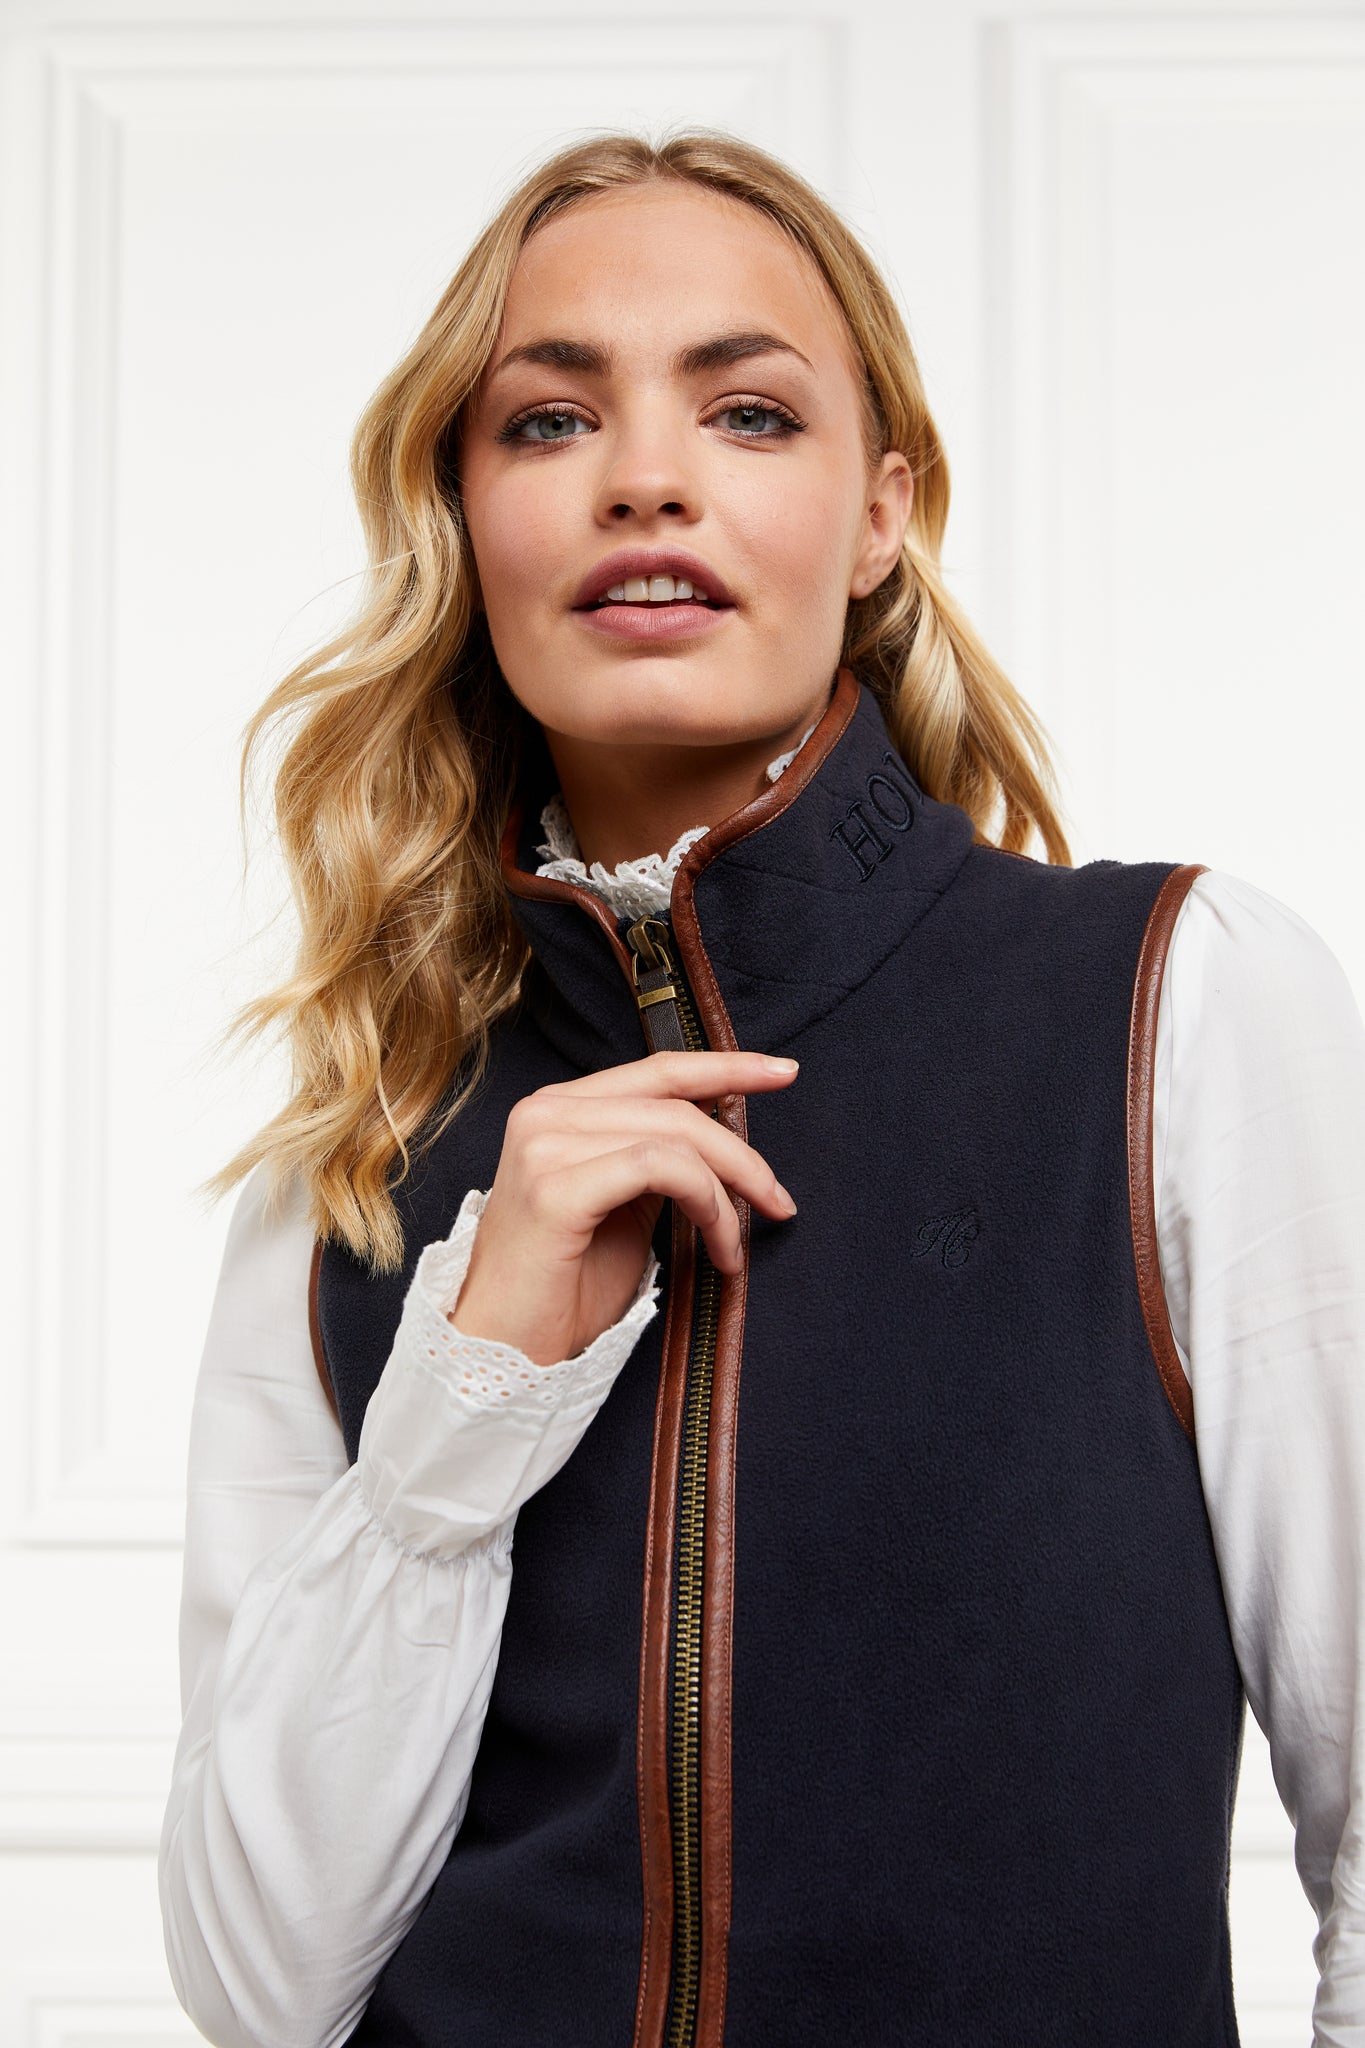 womens fleece gilet in navy with dark brown leather piping around armholes neckline and down the front zip fastening worn with a white shirt